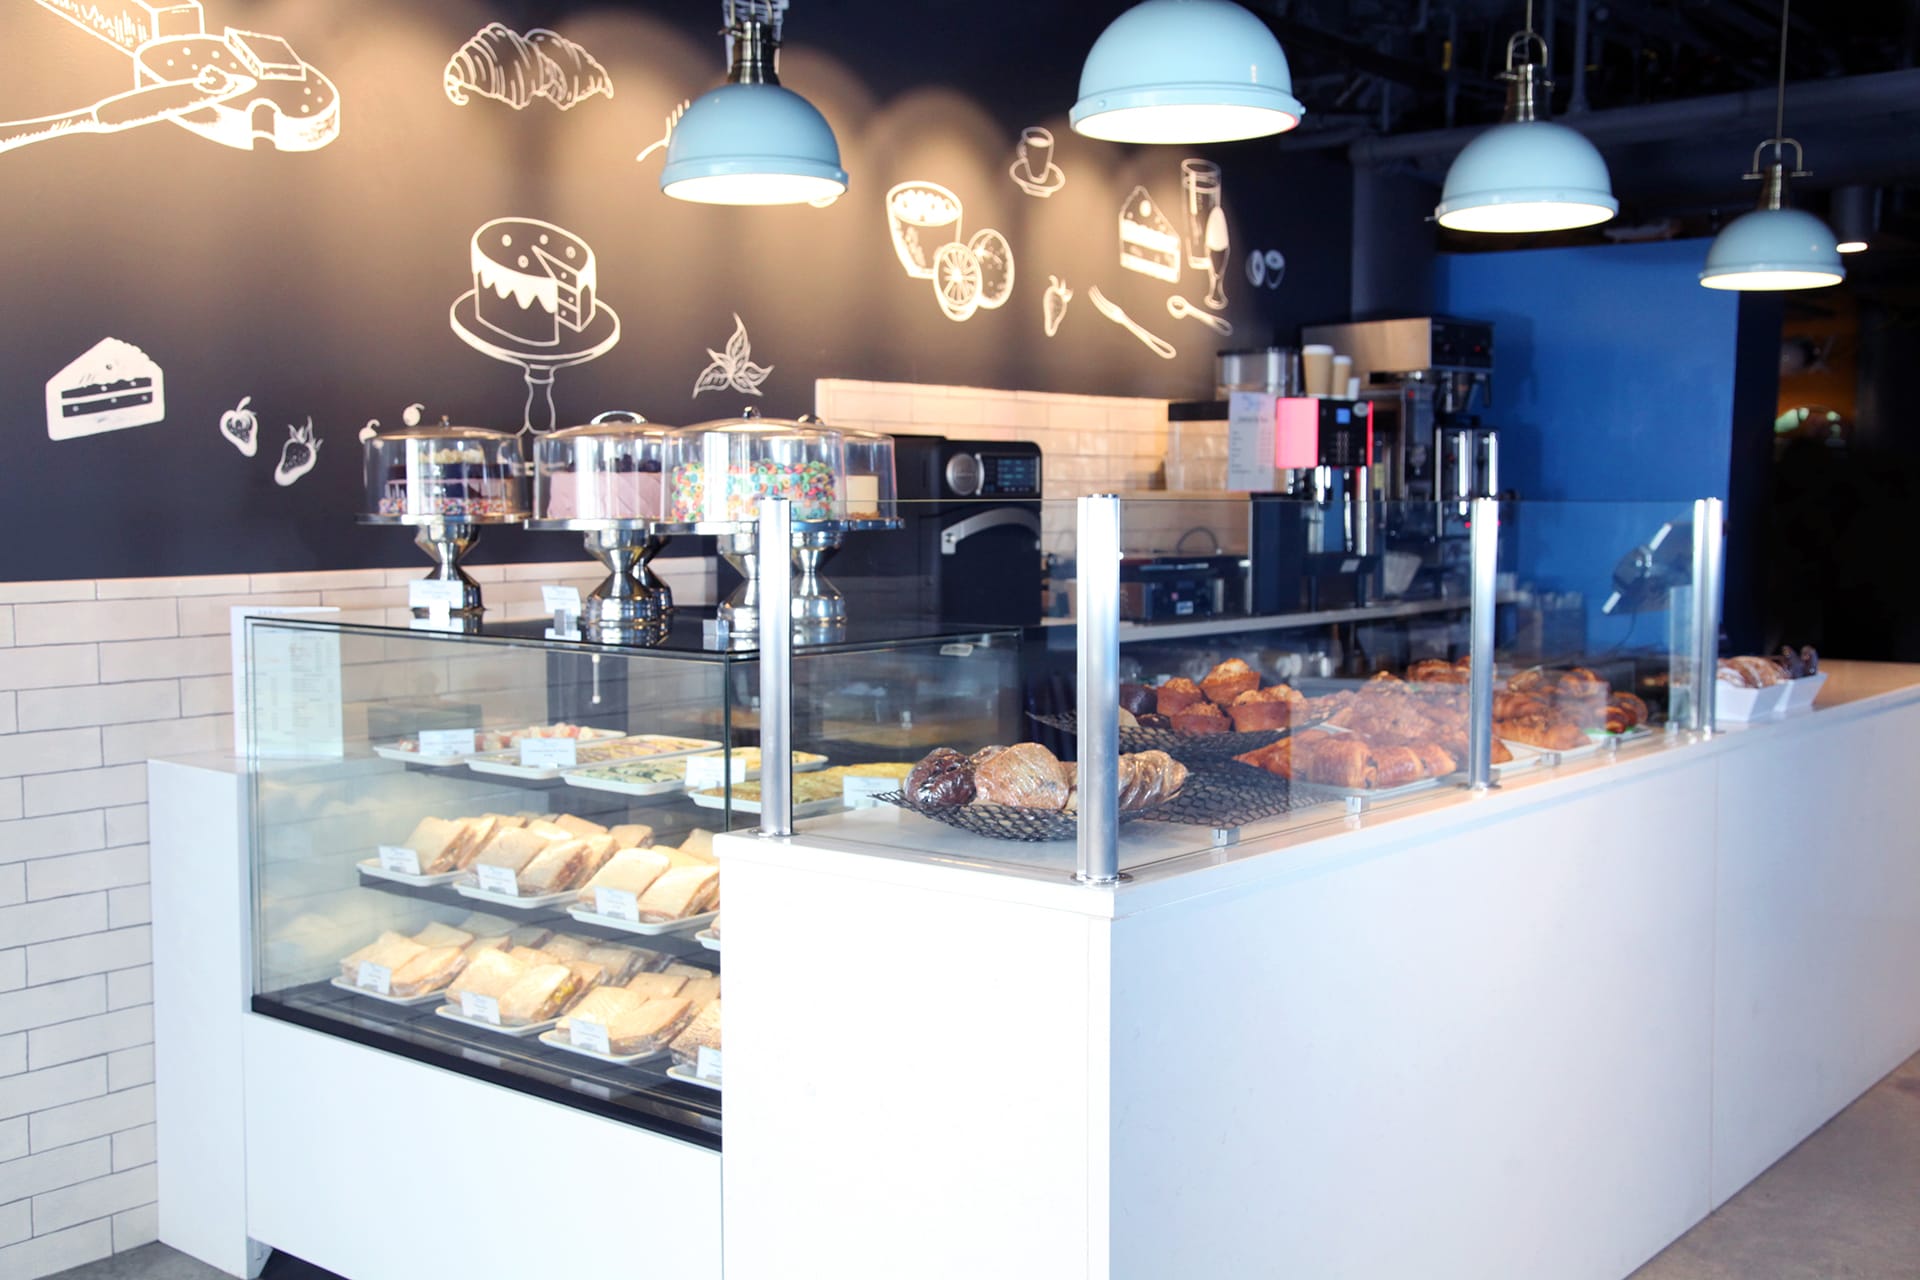 Counter with baked goods in a glass case, four powder blue pendant lights hanging above, and baked goods drawn in white on the black wall.